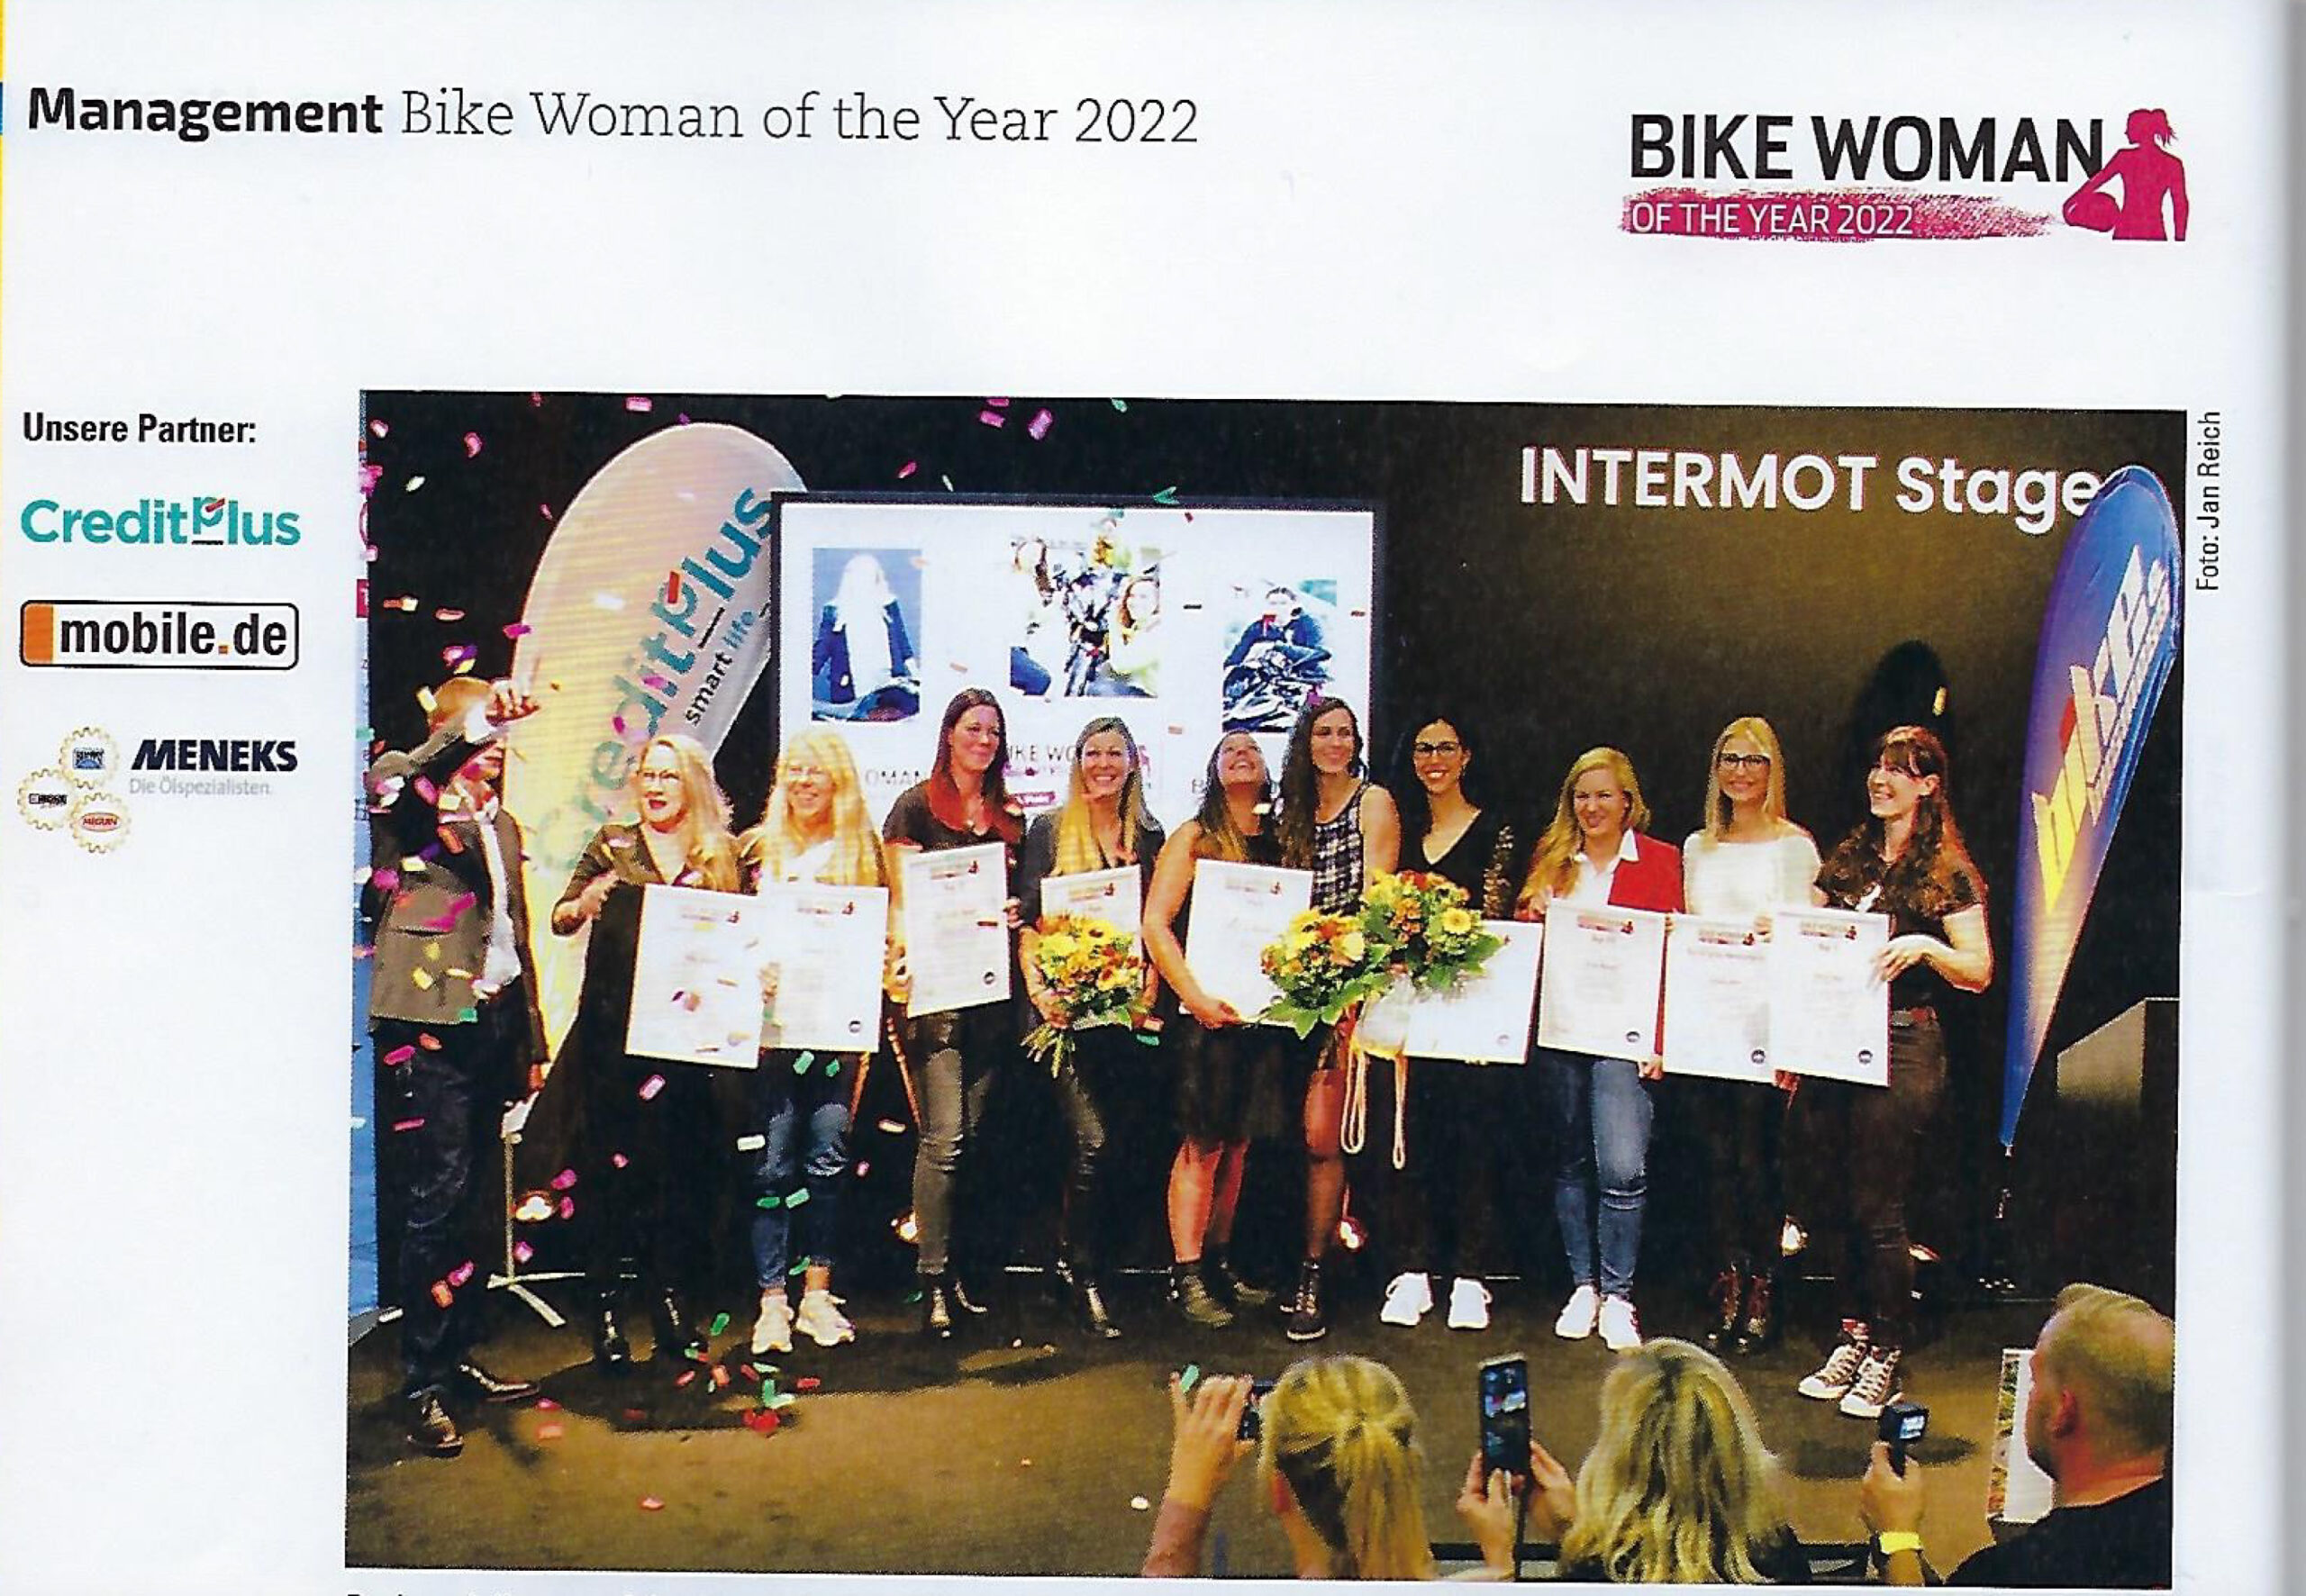 Management Bike Woman of the Year 2022